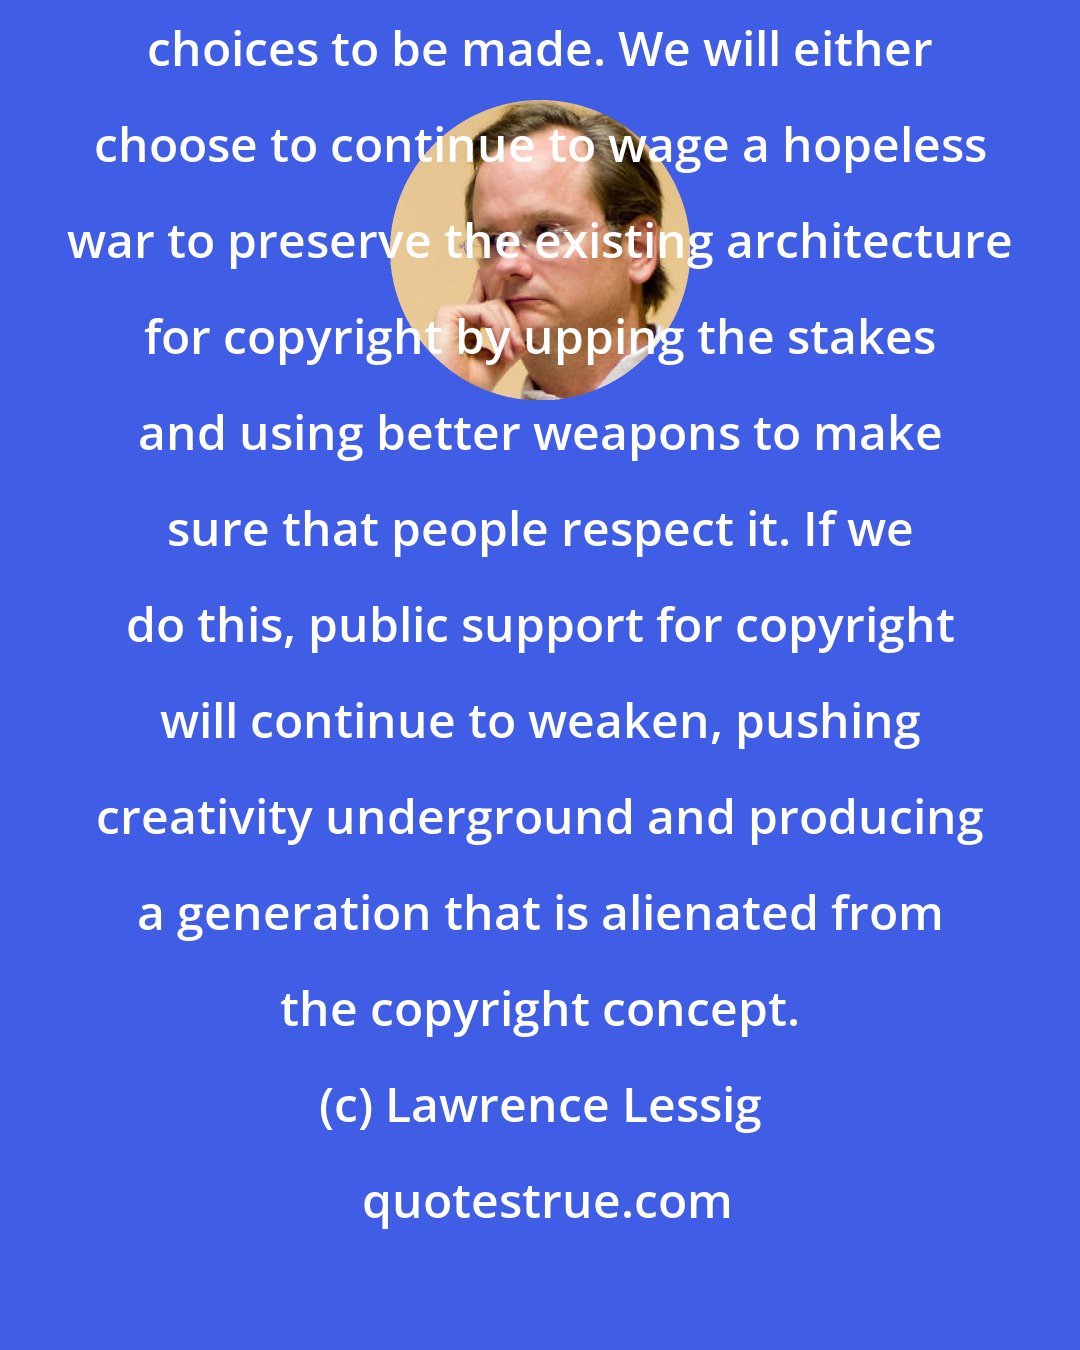 Lawrence Lessig: The crystal ball has a question mark in its center. There are some fundamental choices to be made. We will either choose to continue to wage a hopeless war to preserve the existing architecture for copyright by upping the stakes and using better weapons to make sure that people respect it. If we do this, public support for copyright will continue to weaken, pushing creativity underground and producing a generation that is alienated from the copyright concept.